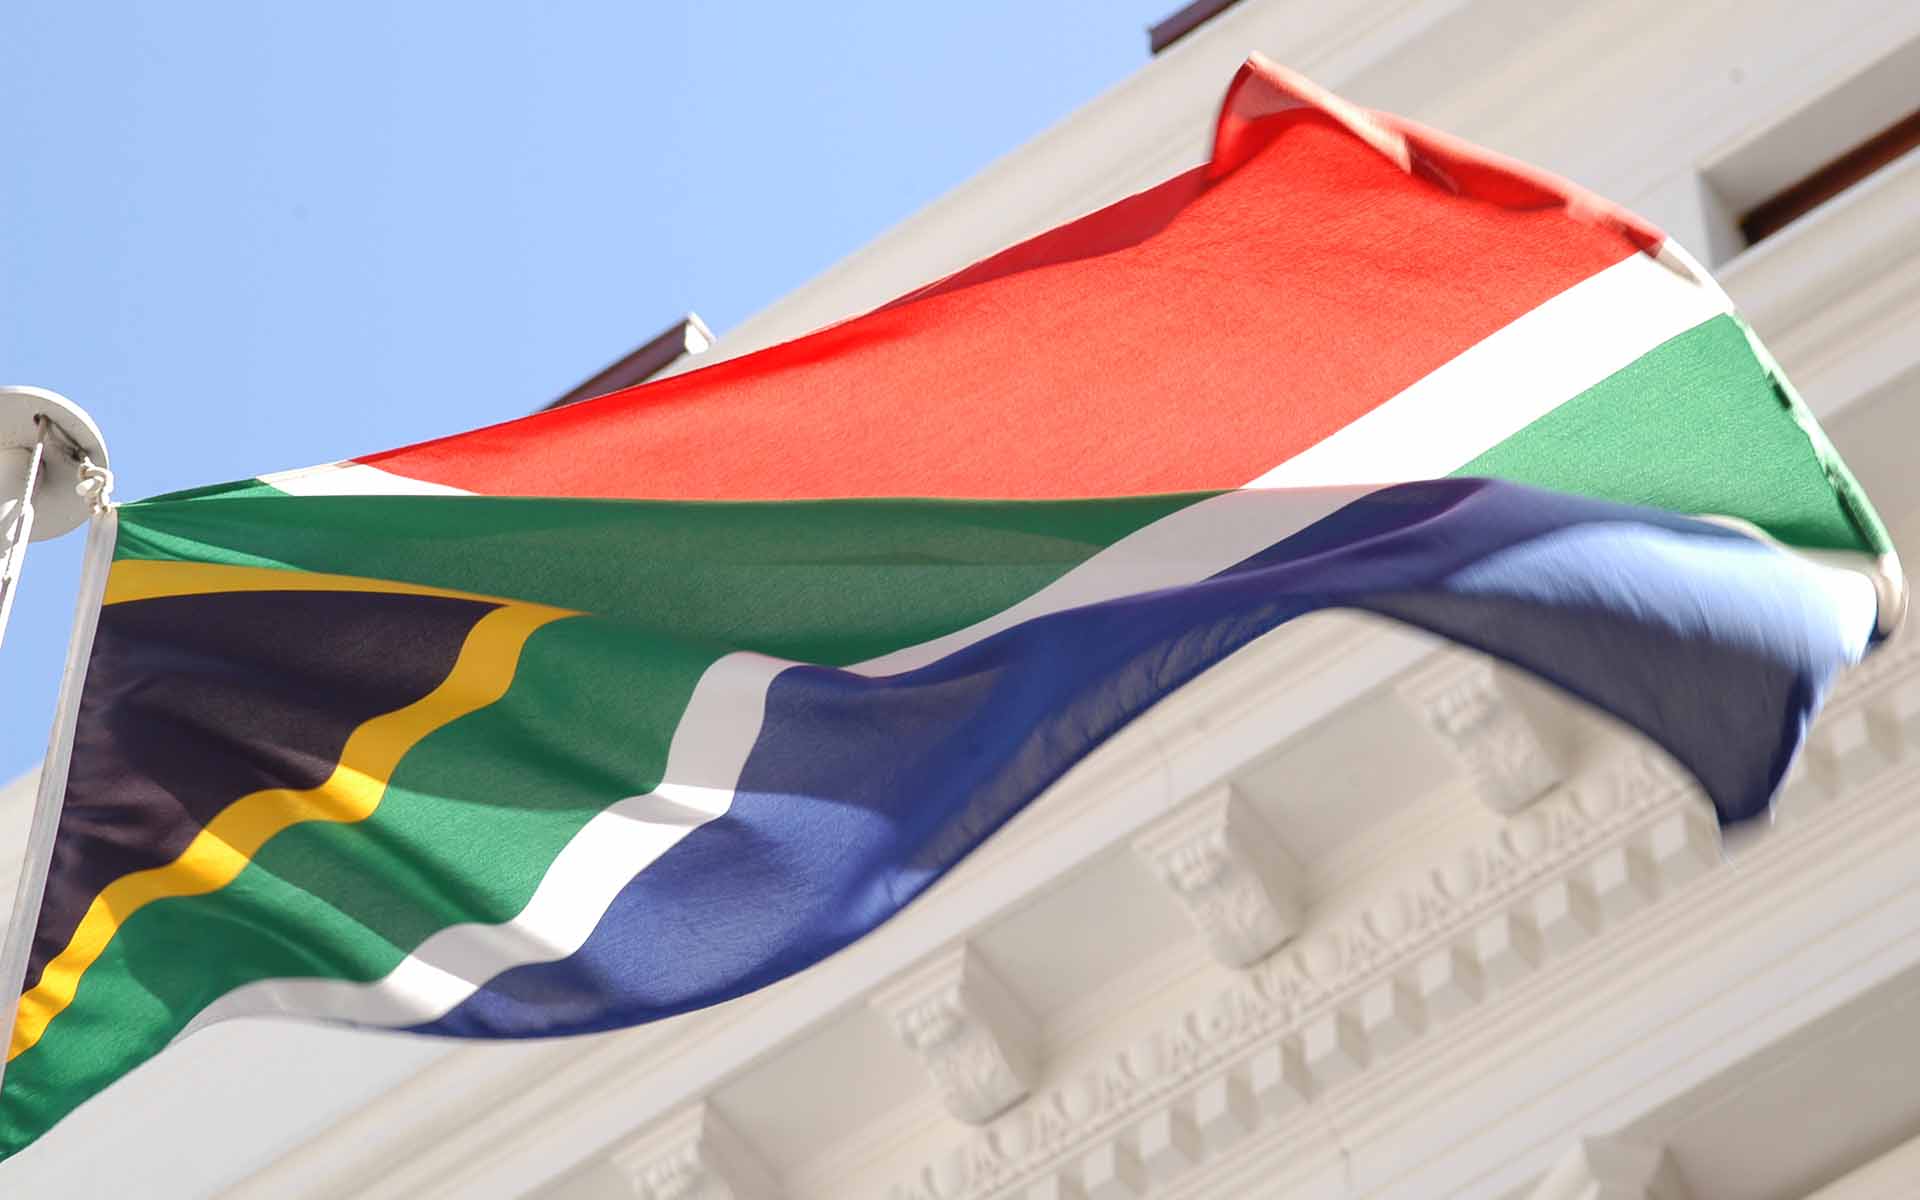 South African Crypto Scam Update: A Bashful Bitcoin Fraudster and More than $80m Missing